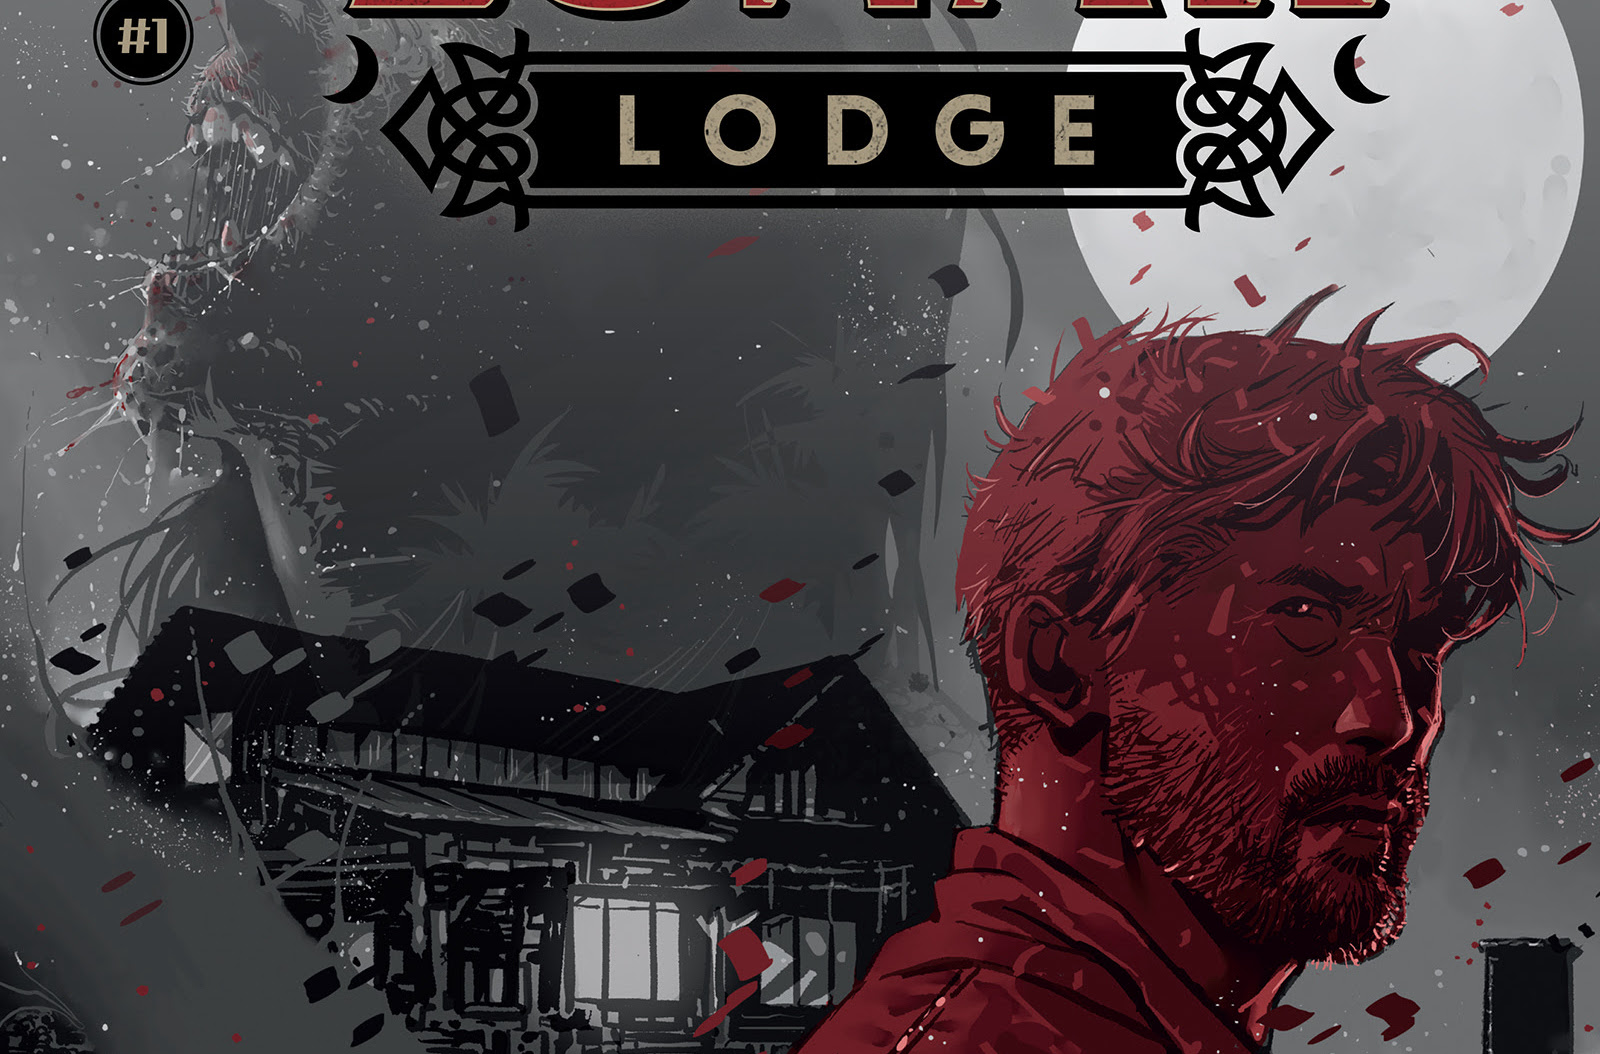 'Lunar Lodge' explores horror, comedy, love and more with werewolf lifestyles